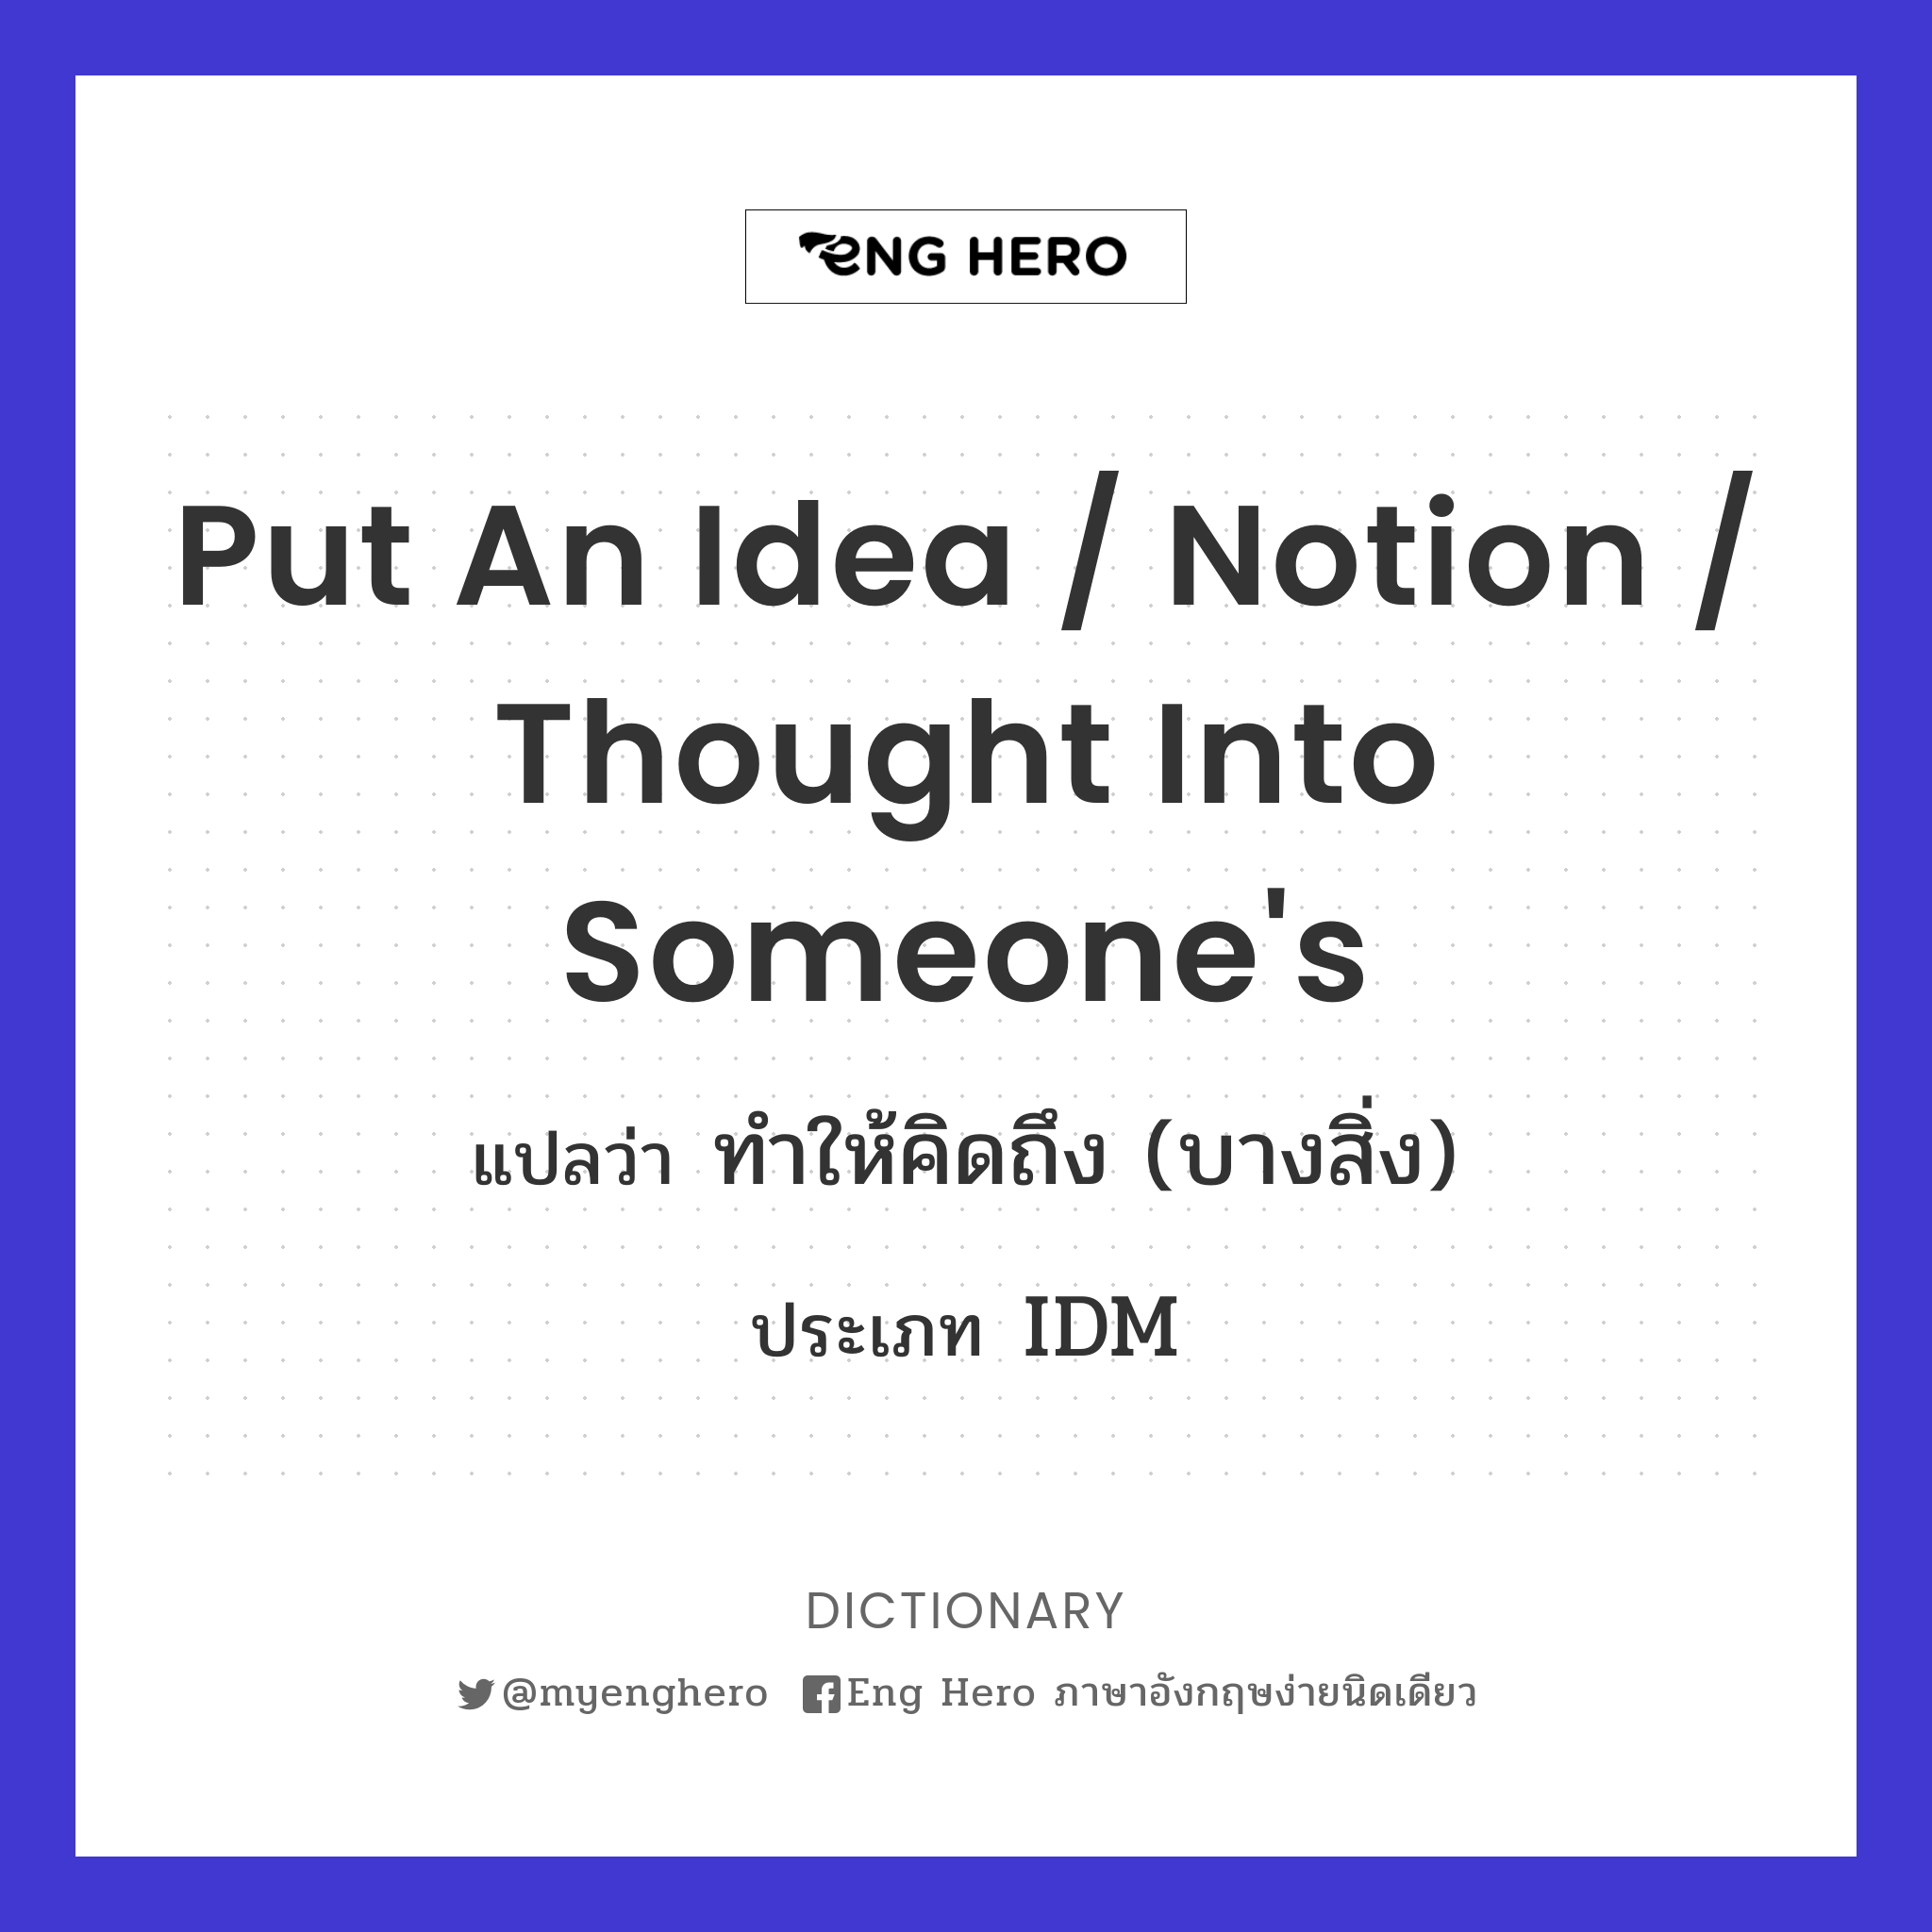 put an idea / notion / thought into someone's